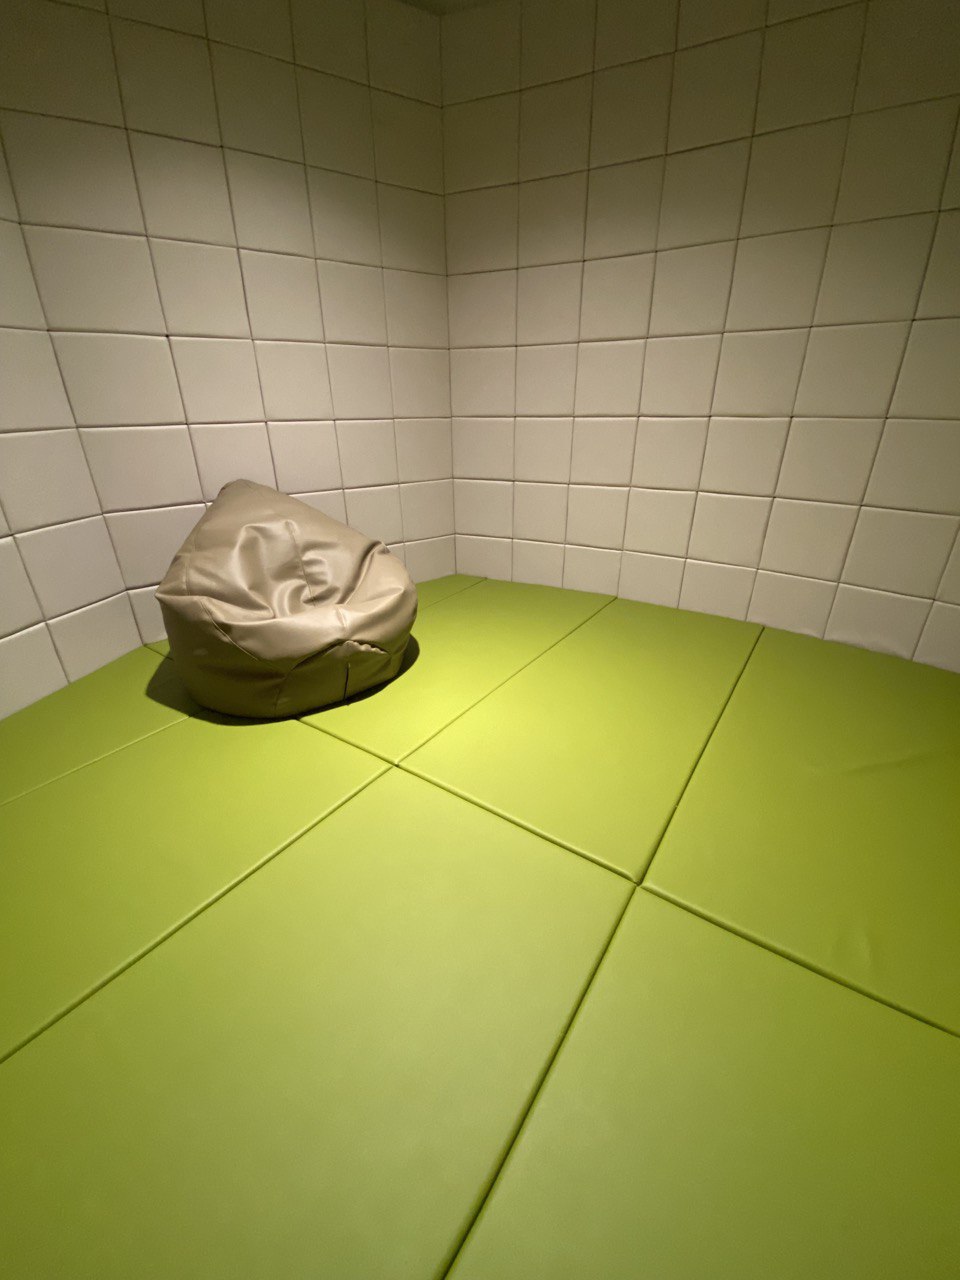 The inner private space of the Calm Pod. It has padded walls and flooring, and a beanbag is also provided